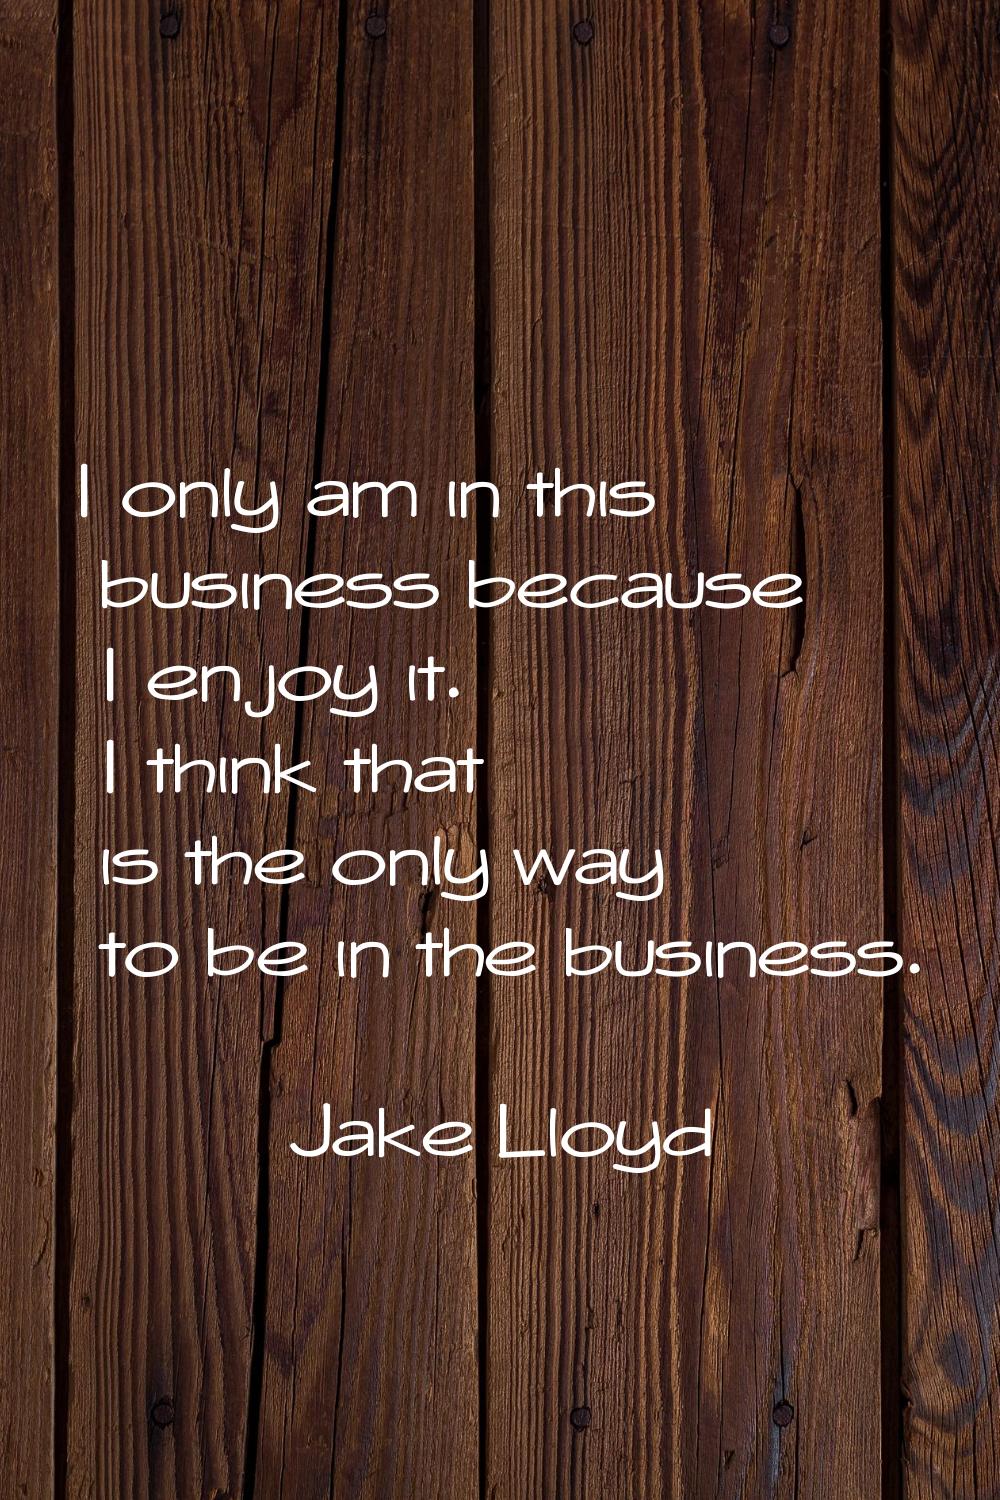 I only am in this business because I enjoy it. I think that is the only way to be in the business.